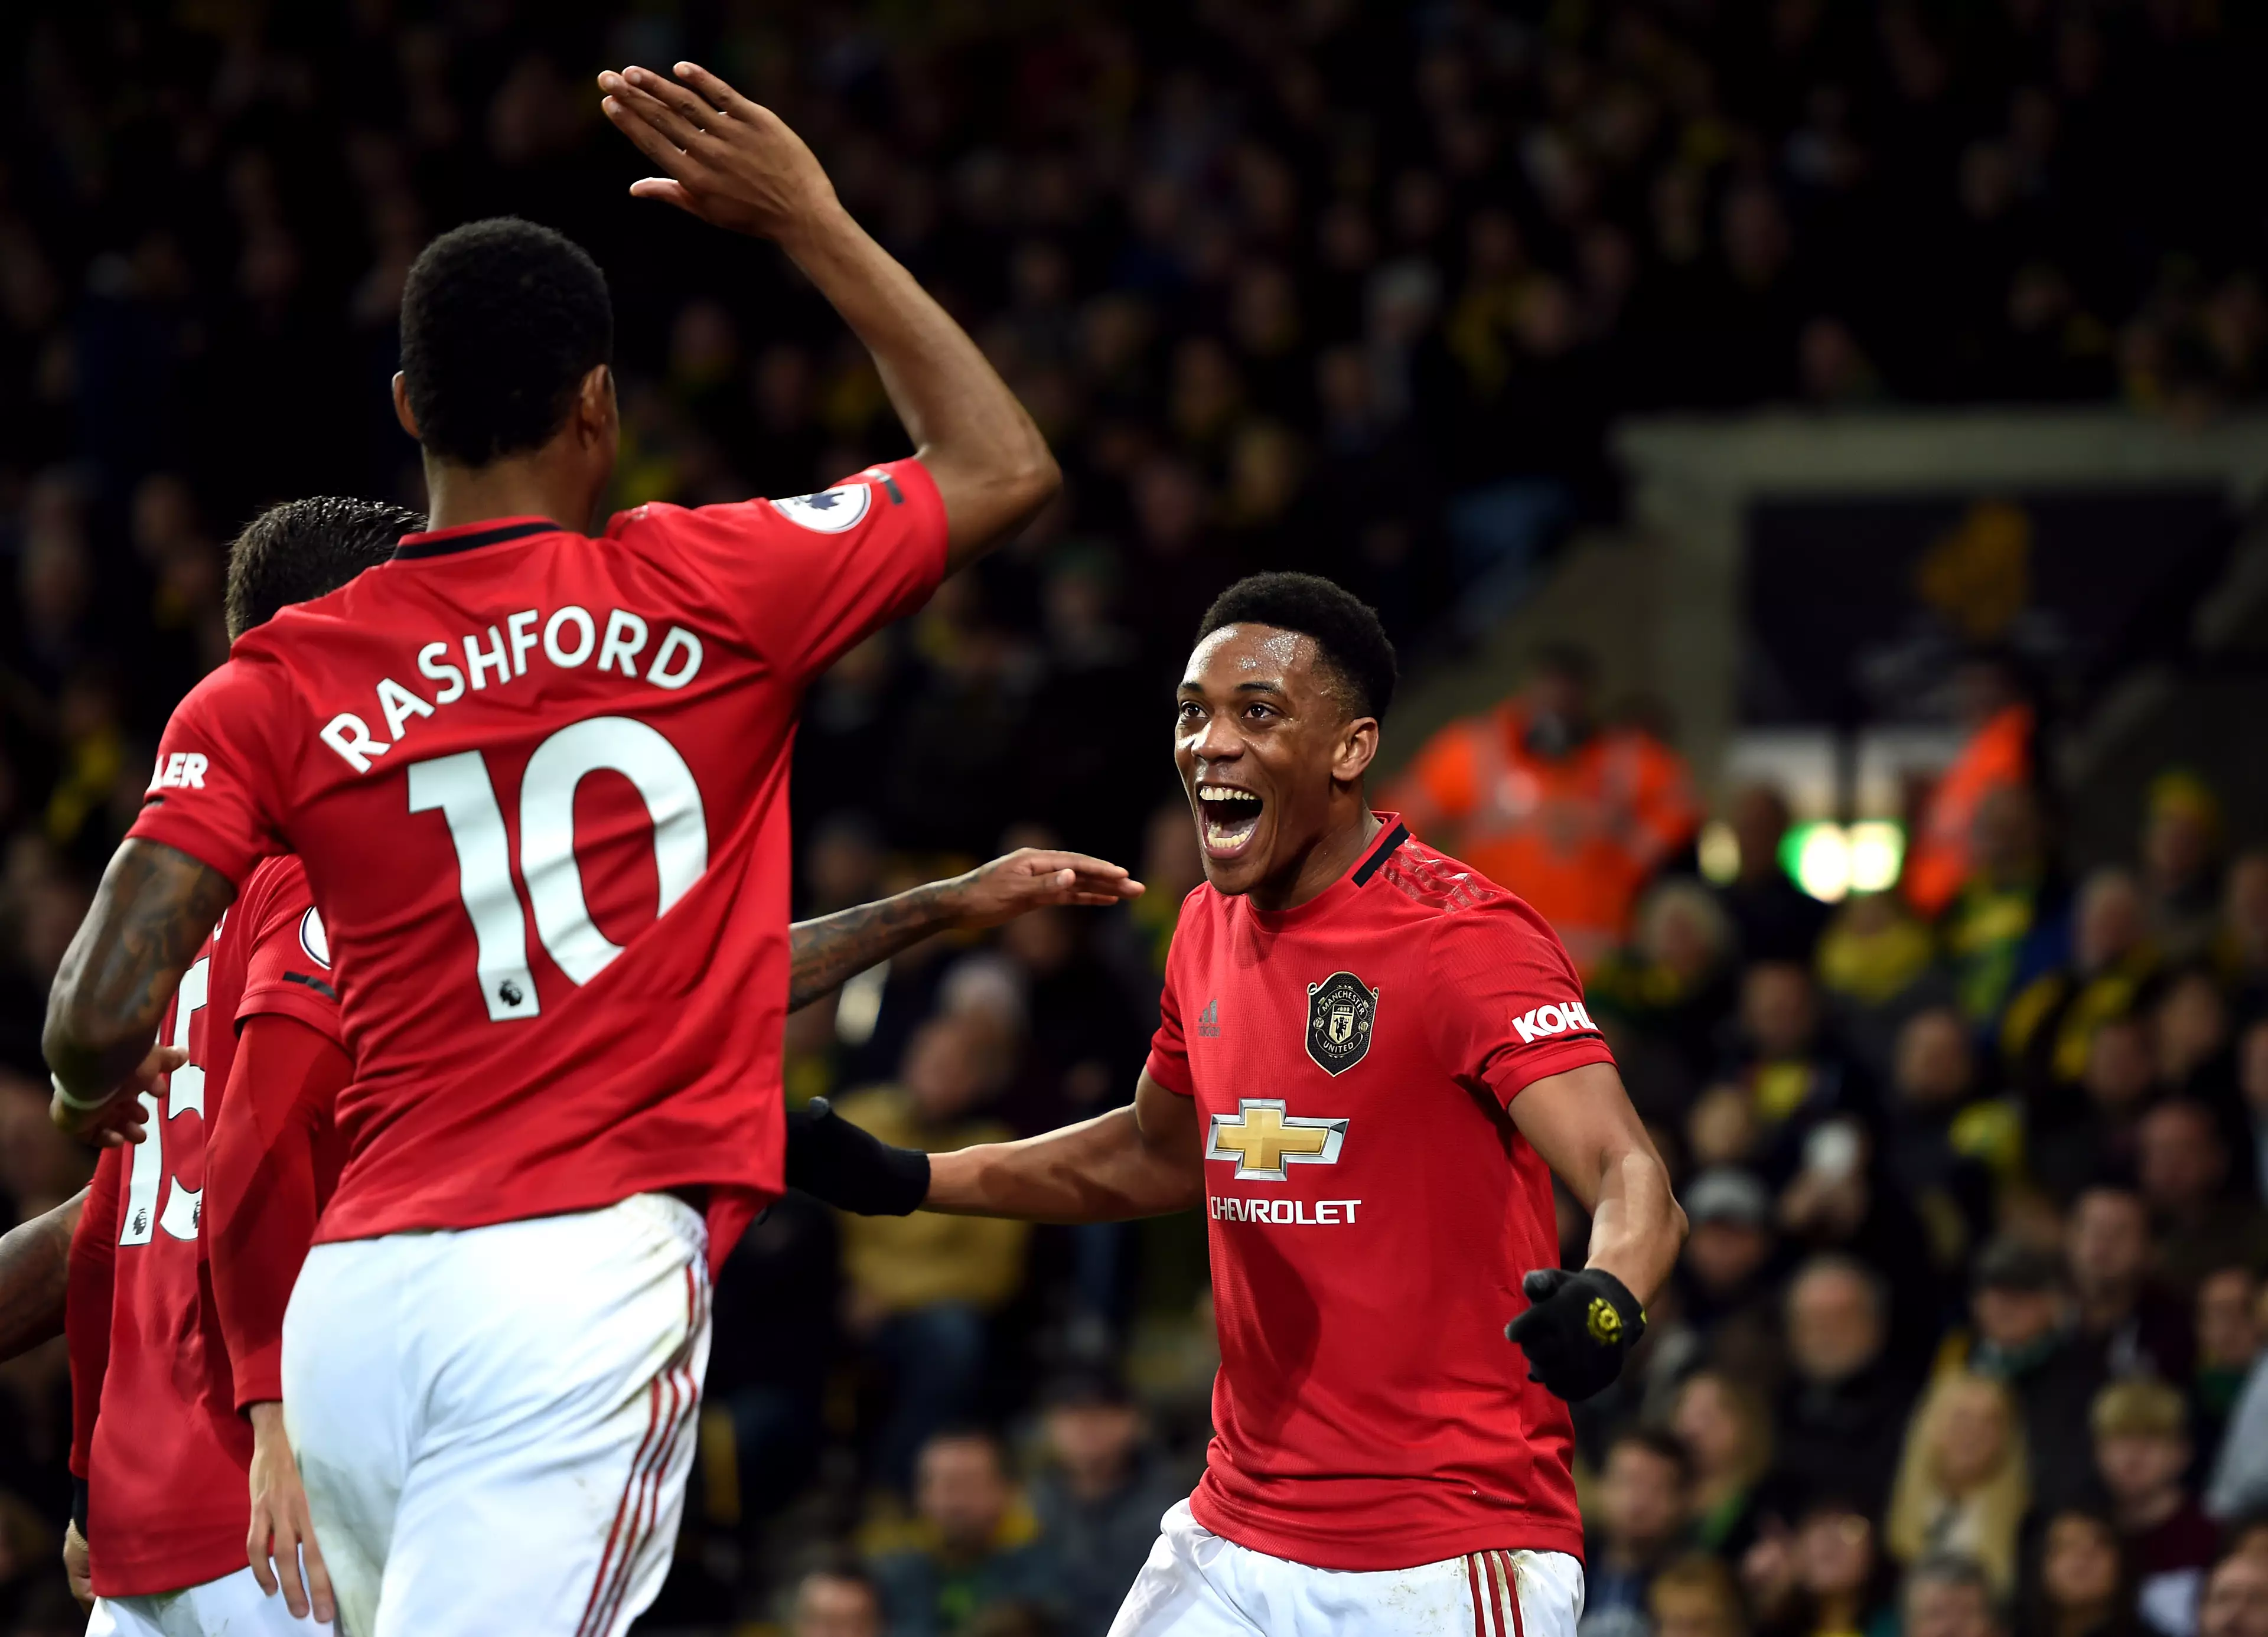 Martial has been in excellent form since his return. Image: PA Images